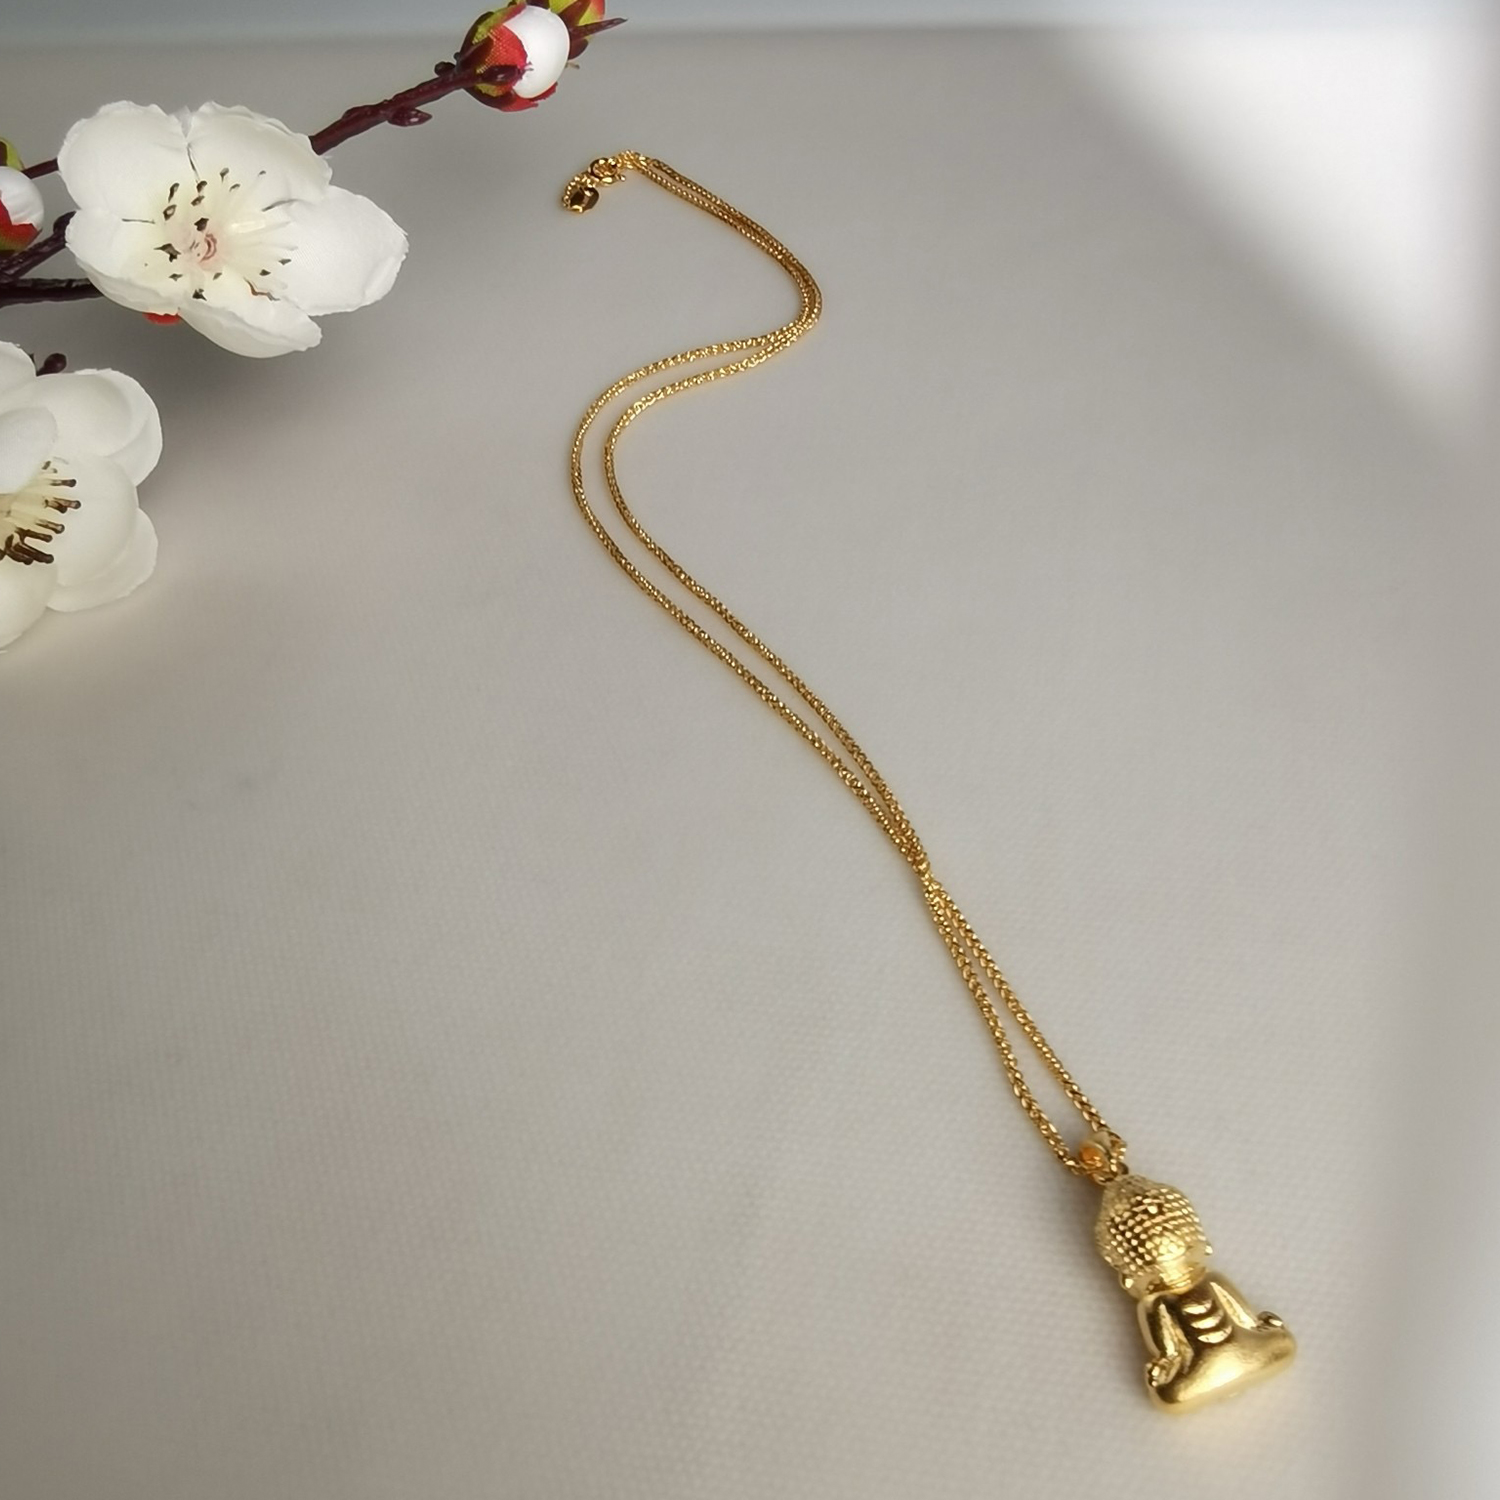 Alluvial Gold Ancient Method Vacuum Electroplating 24K Gold Buddha Boy Necklace